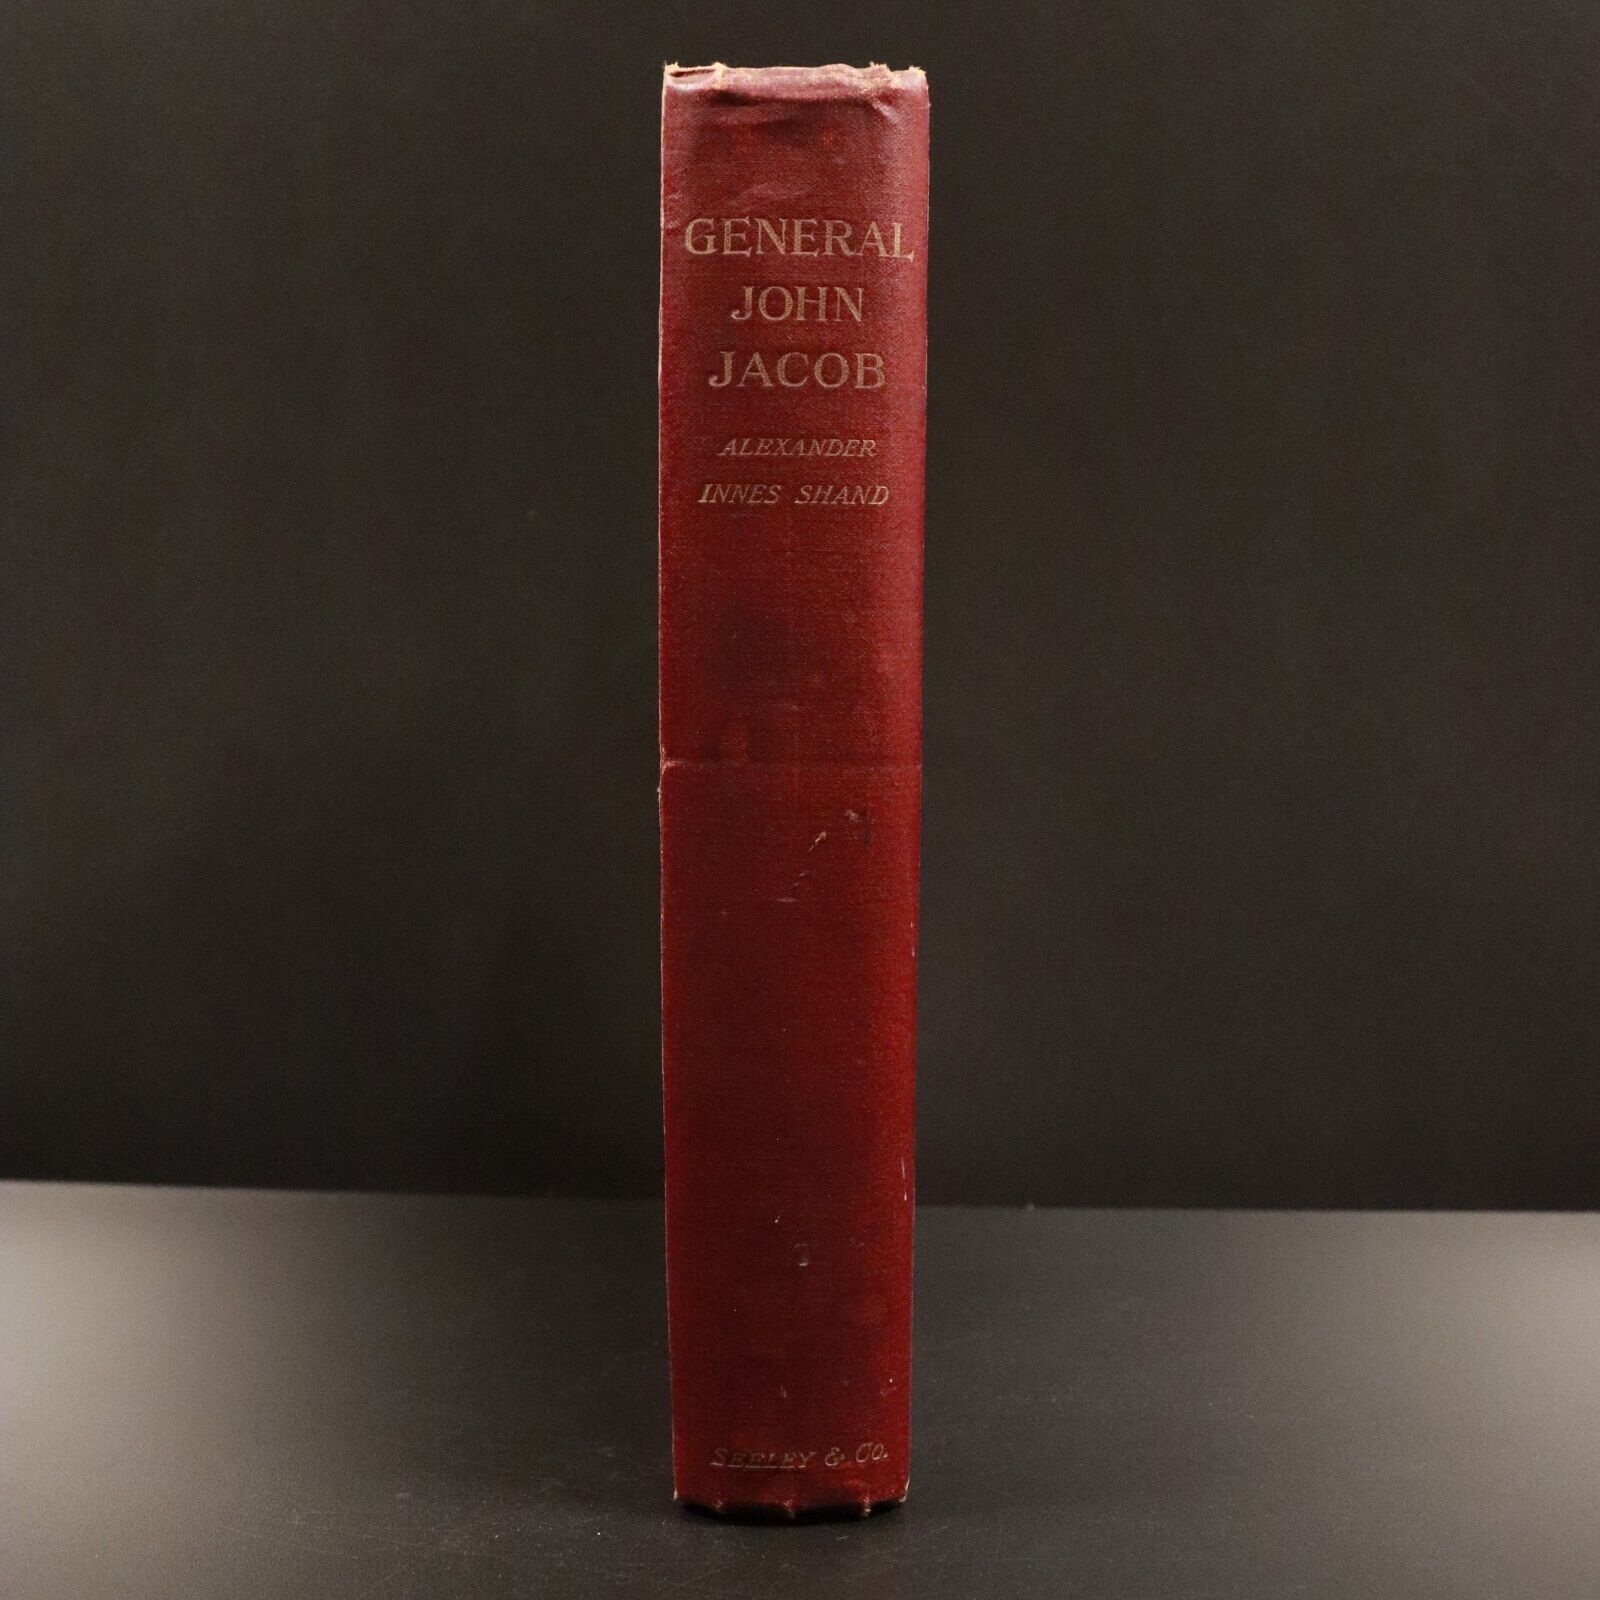 1901 General John Jacob by A.I. Shand - British East India Antique History Book